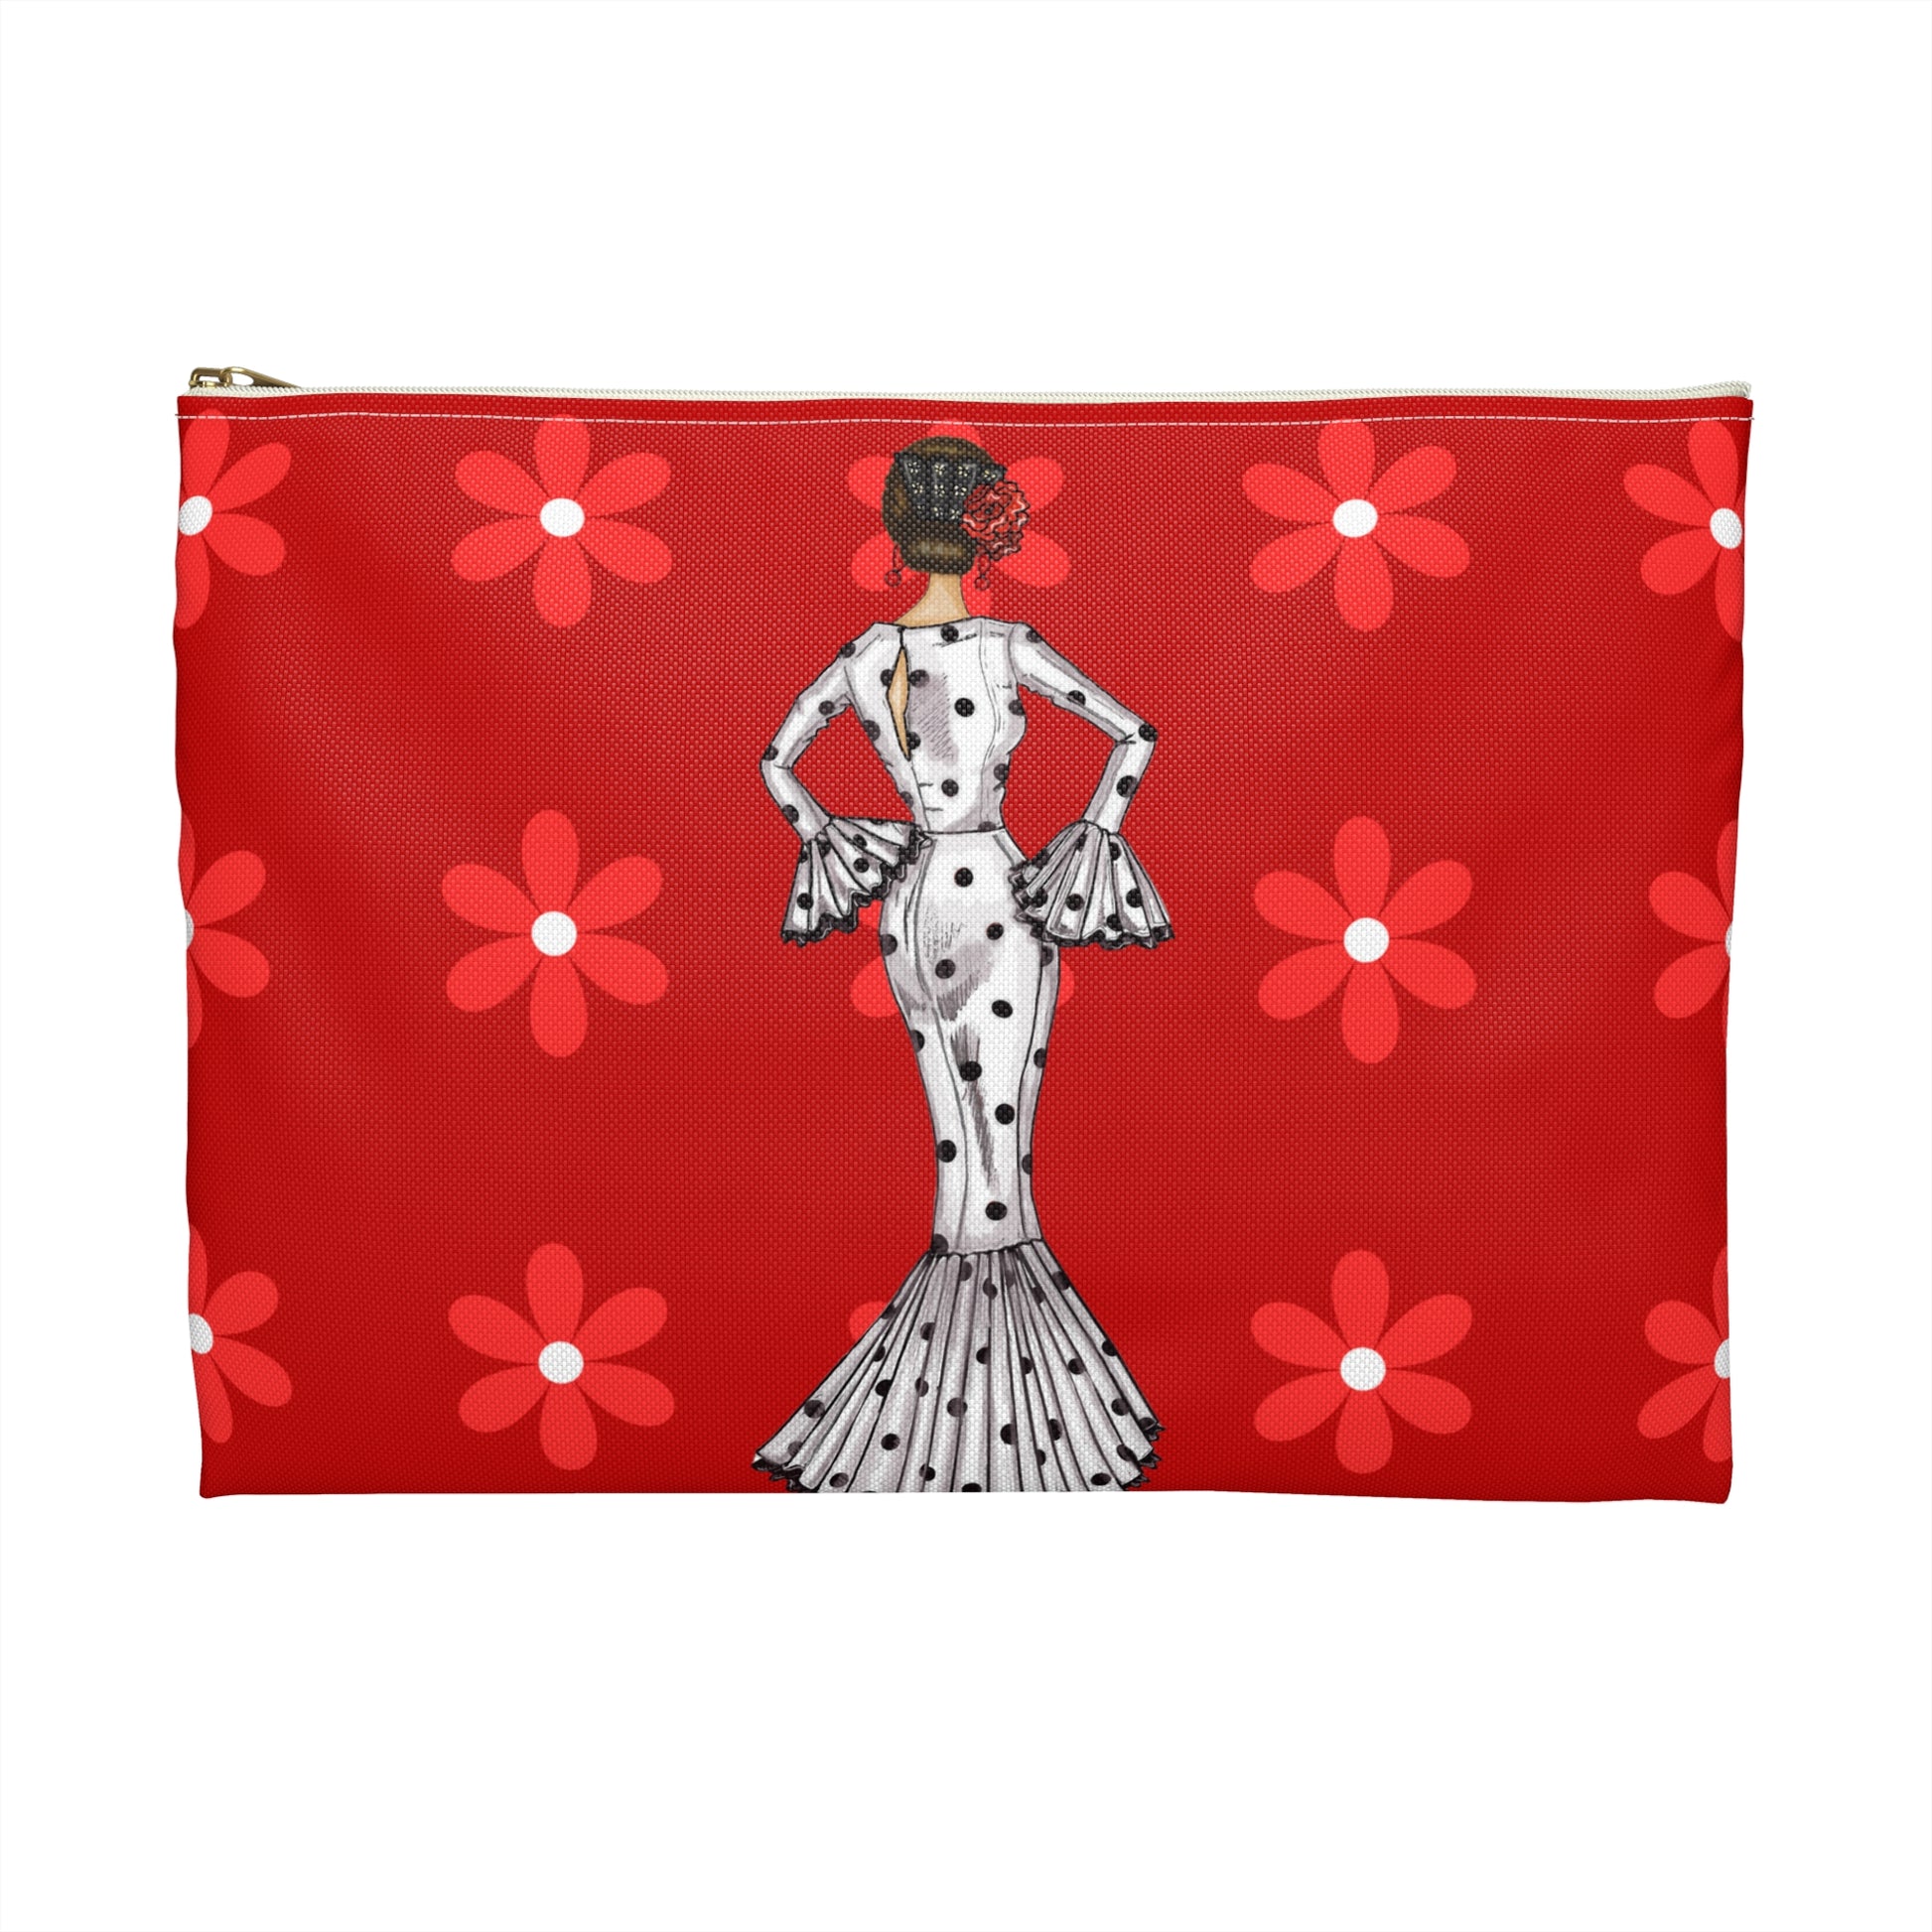 a red zipper bag with a picture of a woman in a polka dot dress